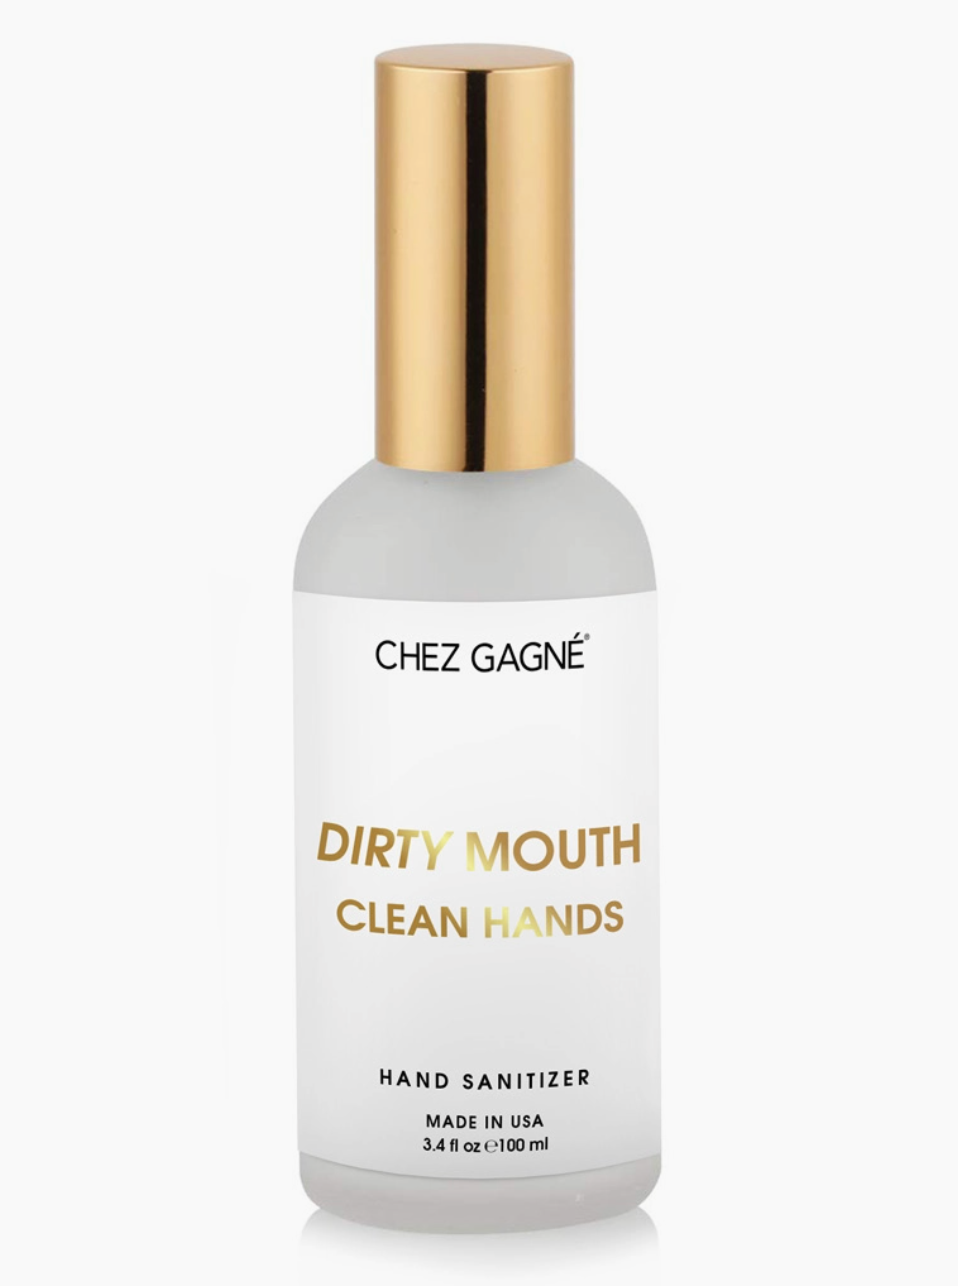 Dirty Mouth Clean Hands Hand Sanitizer